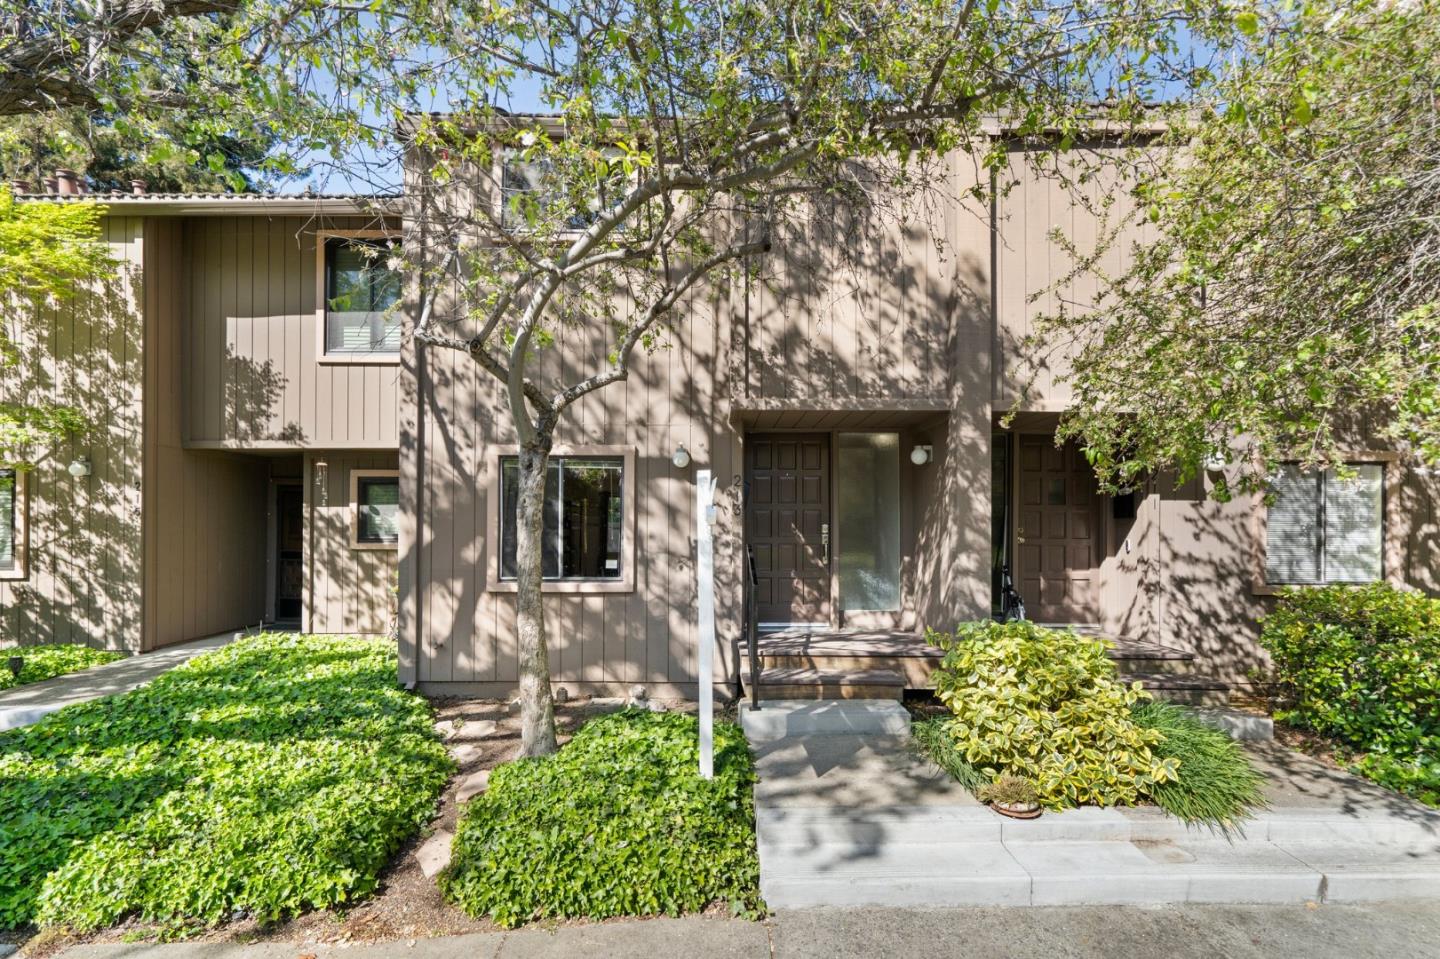 Photo of 213 Horizon Ave in Mountain View, CA